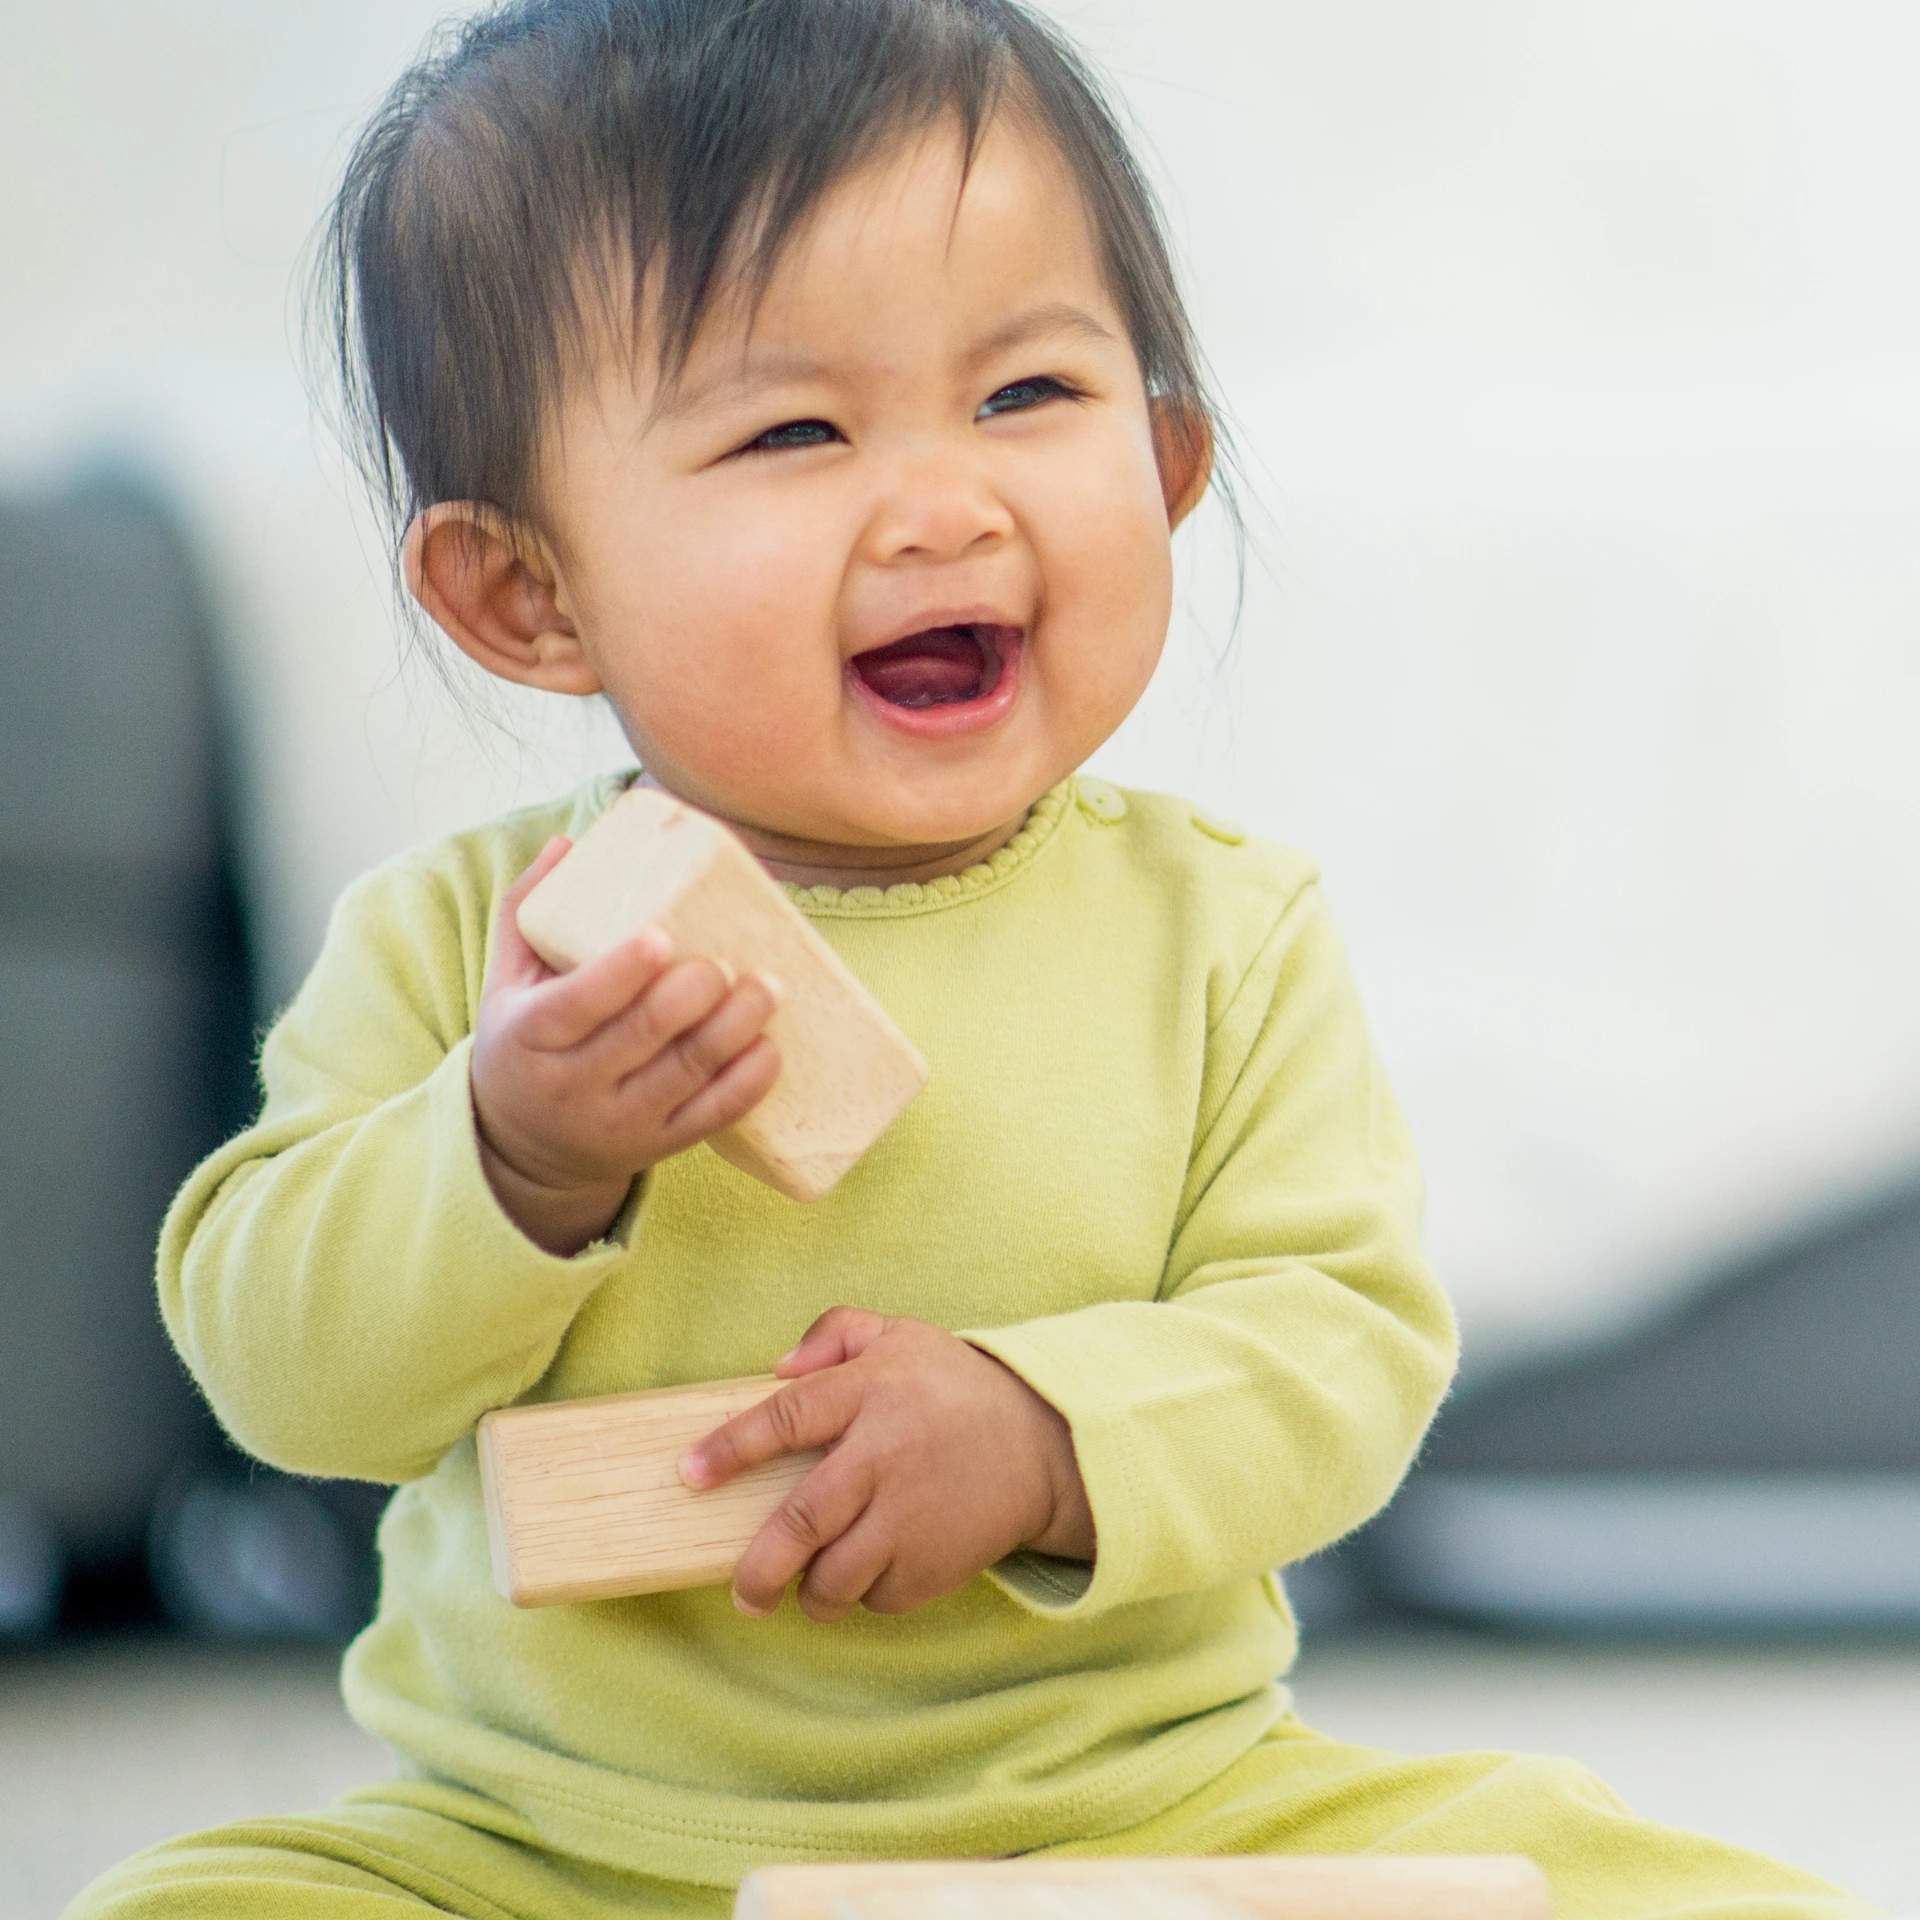 Asian baby in a light green outfit and playing with wood blocks. Baby is smiling with their mouth wide open.